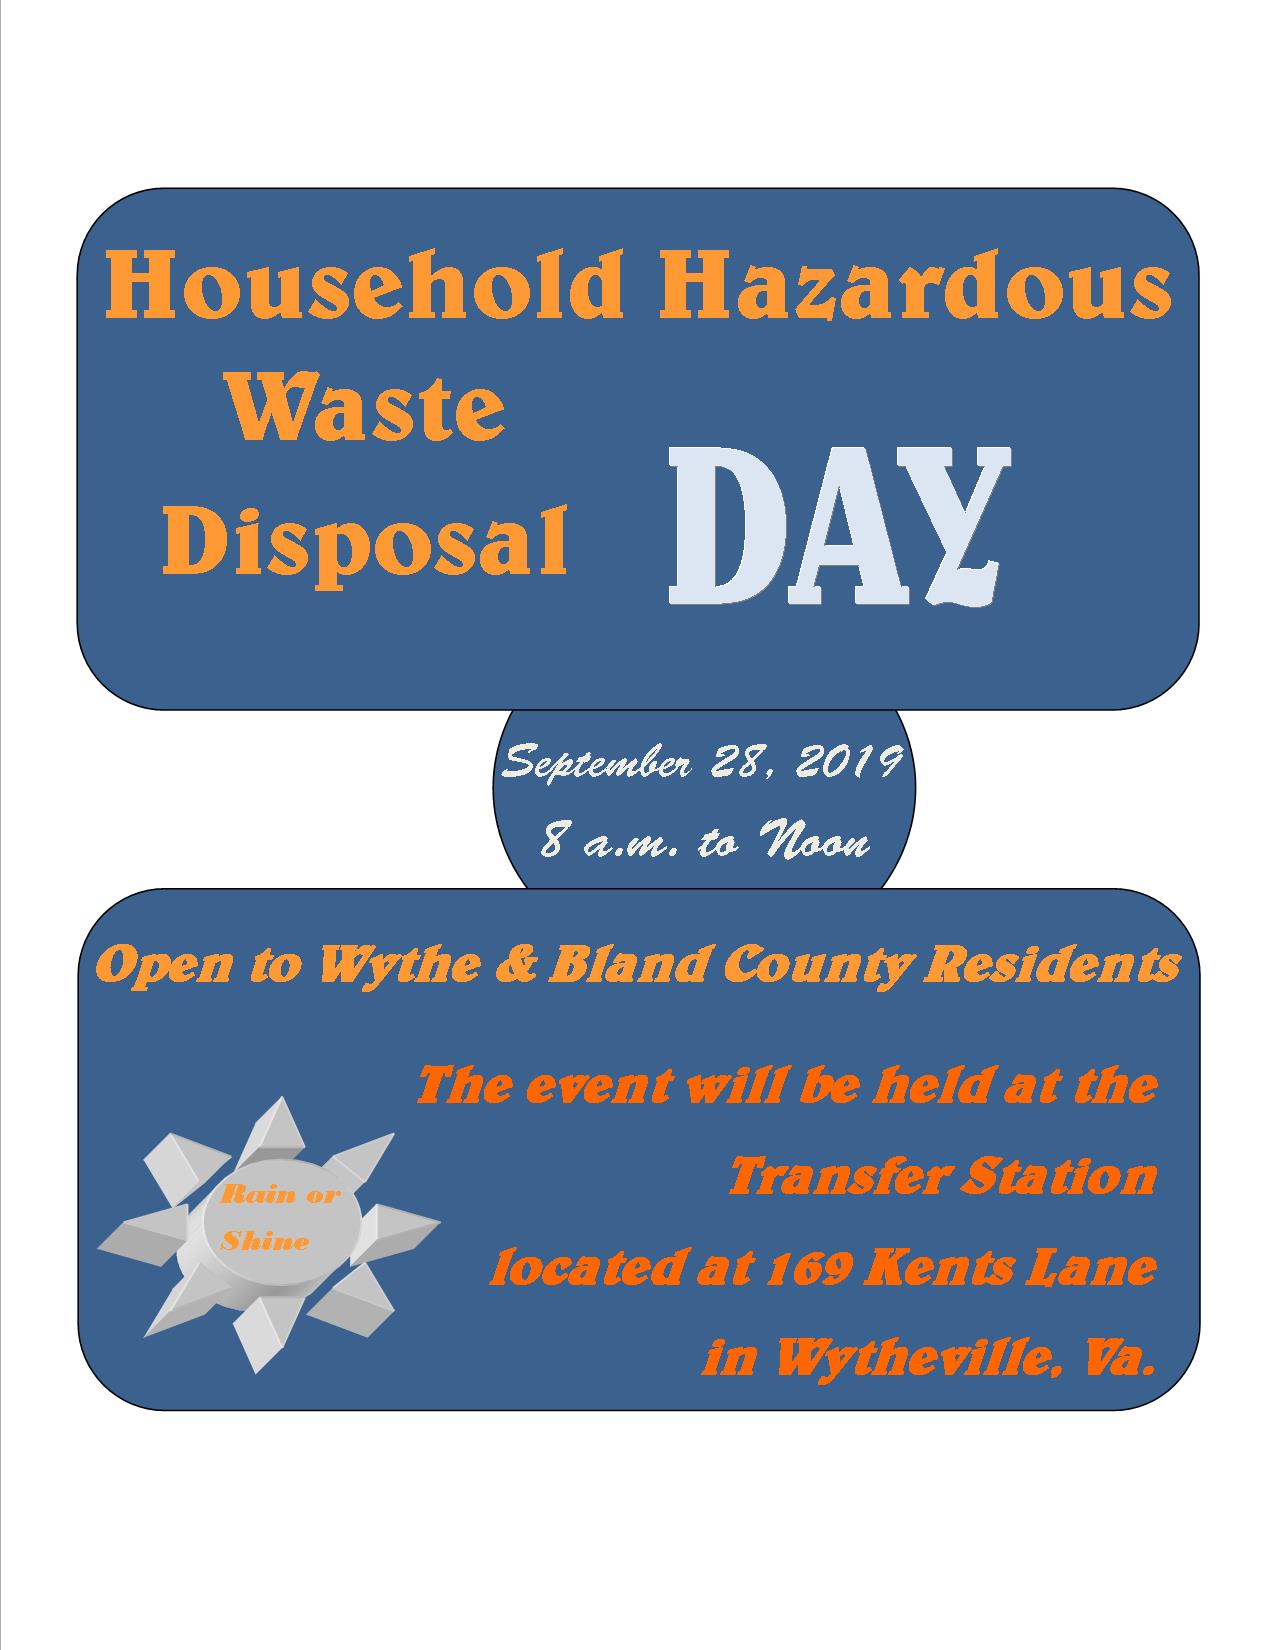 HOUSEHOLD HAZARDOUS WASTE DISPOSAL DAY TO BE HELD ON  SEPTEMBER 28, 2019